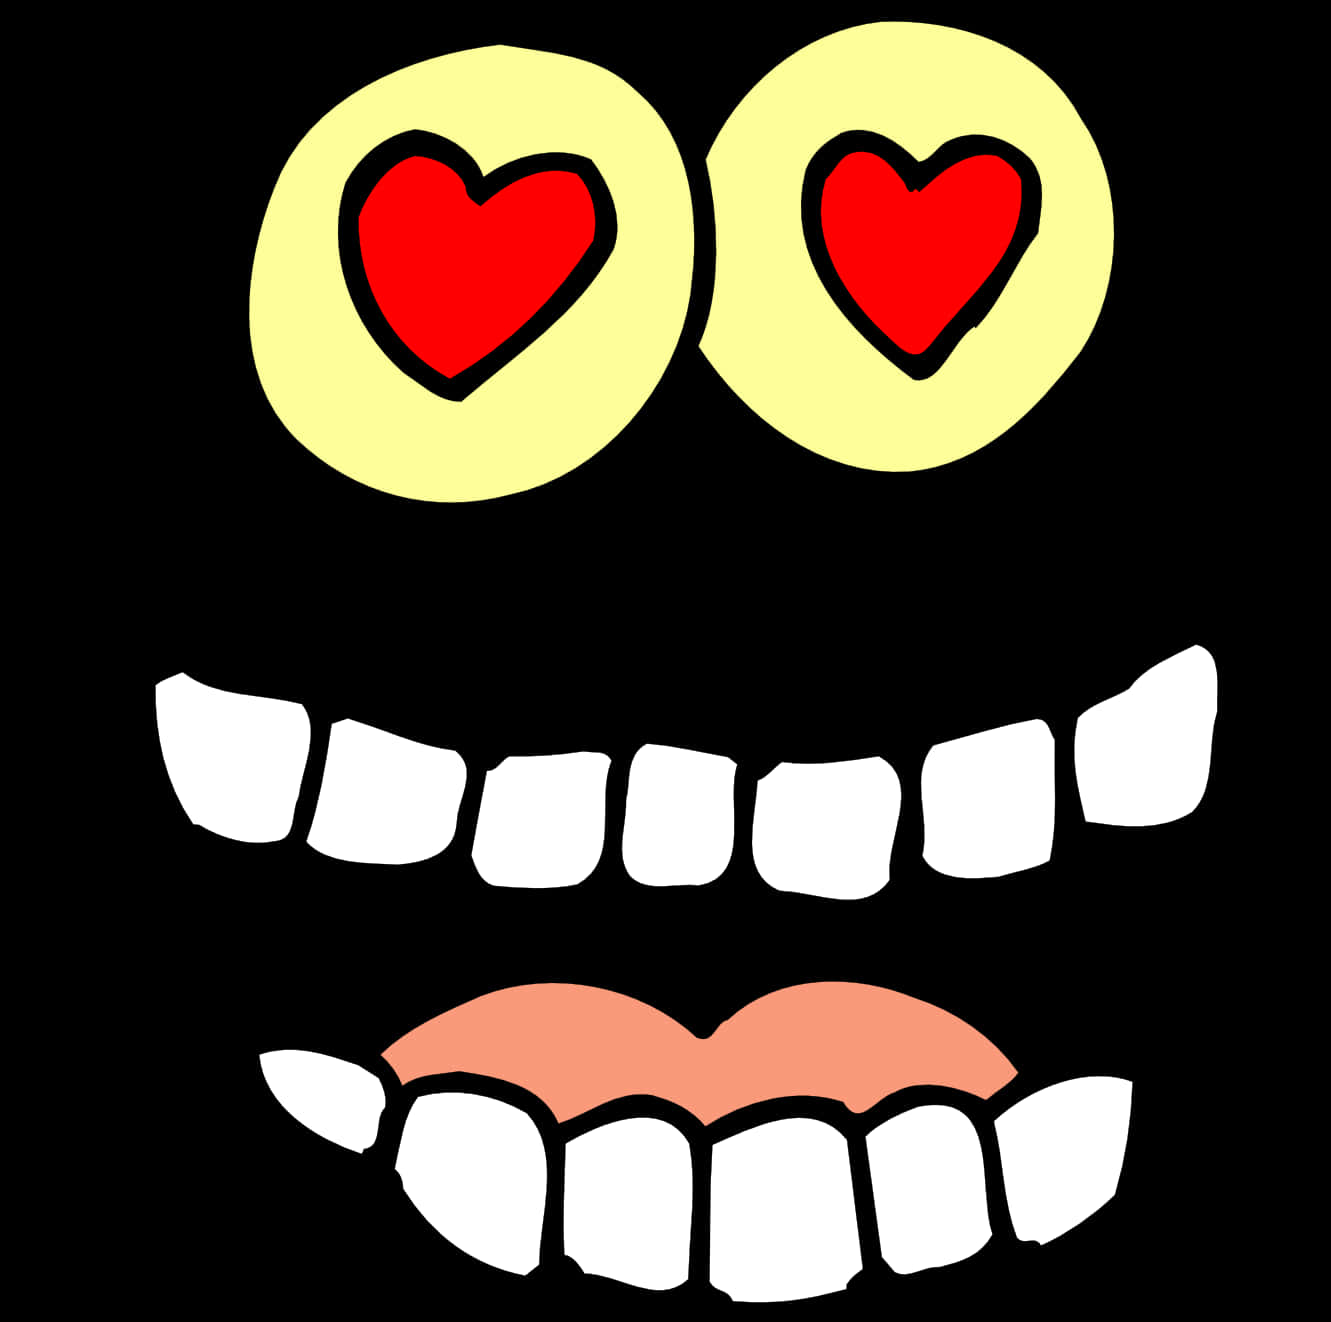 Heart Eyed Smiley Face Graphic PNG